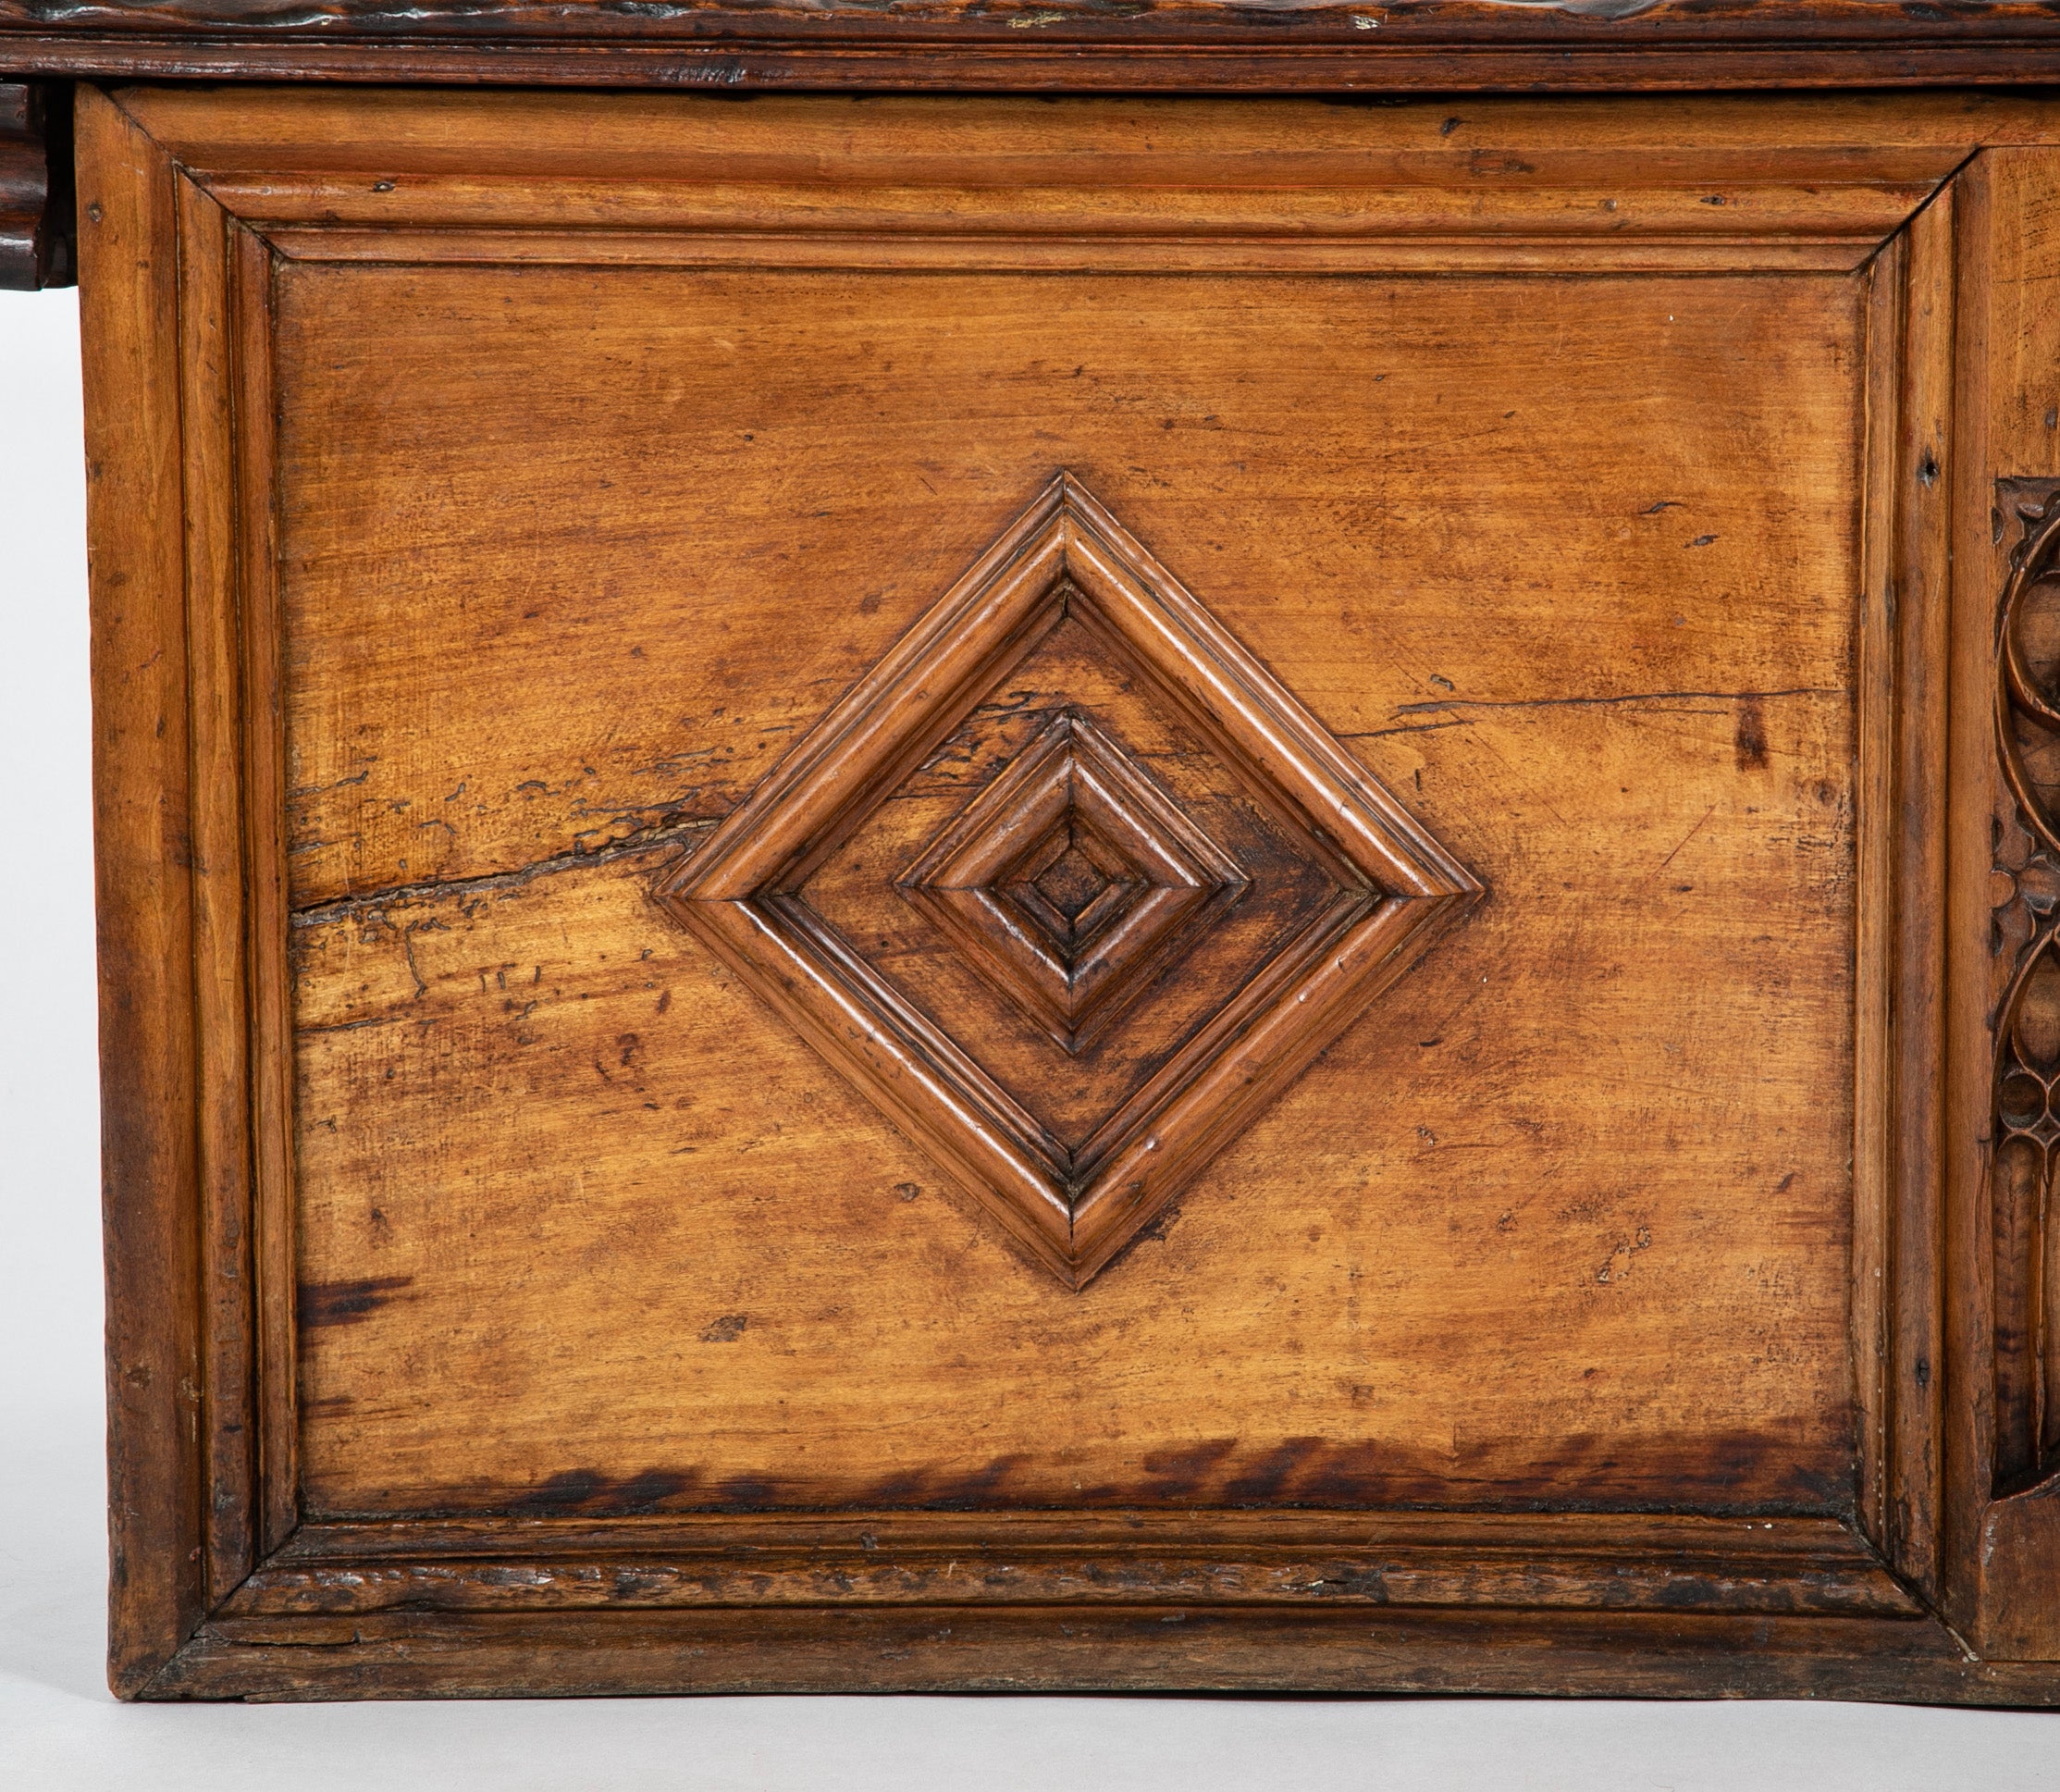 Late 16th / Early 17th Century French Walnut Cassone